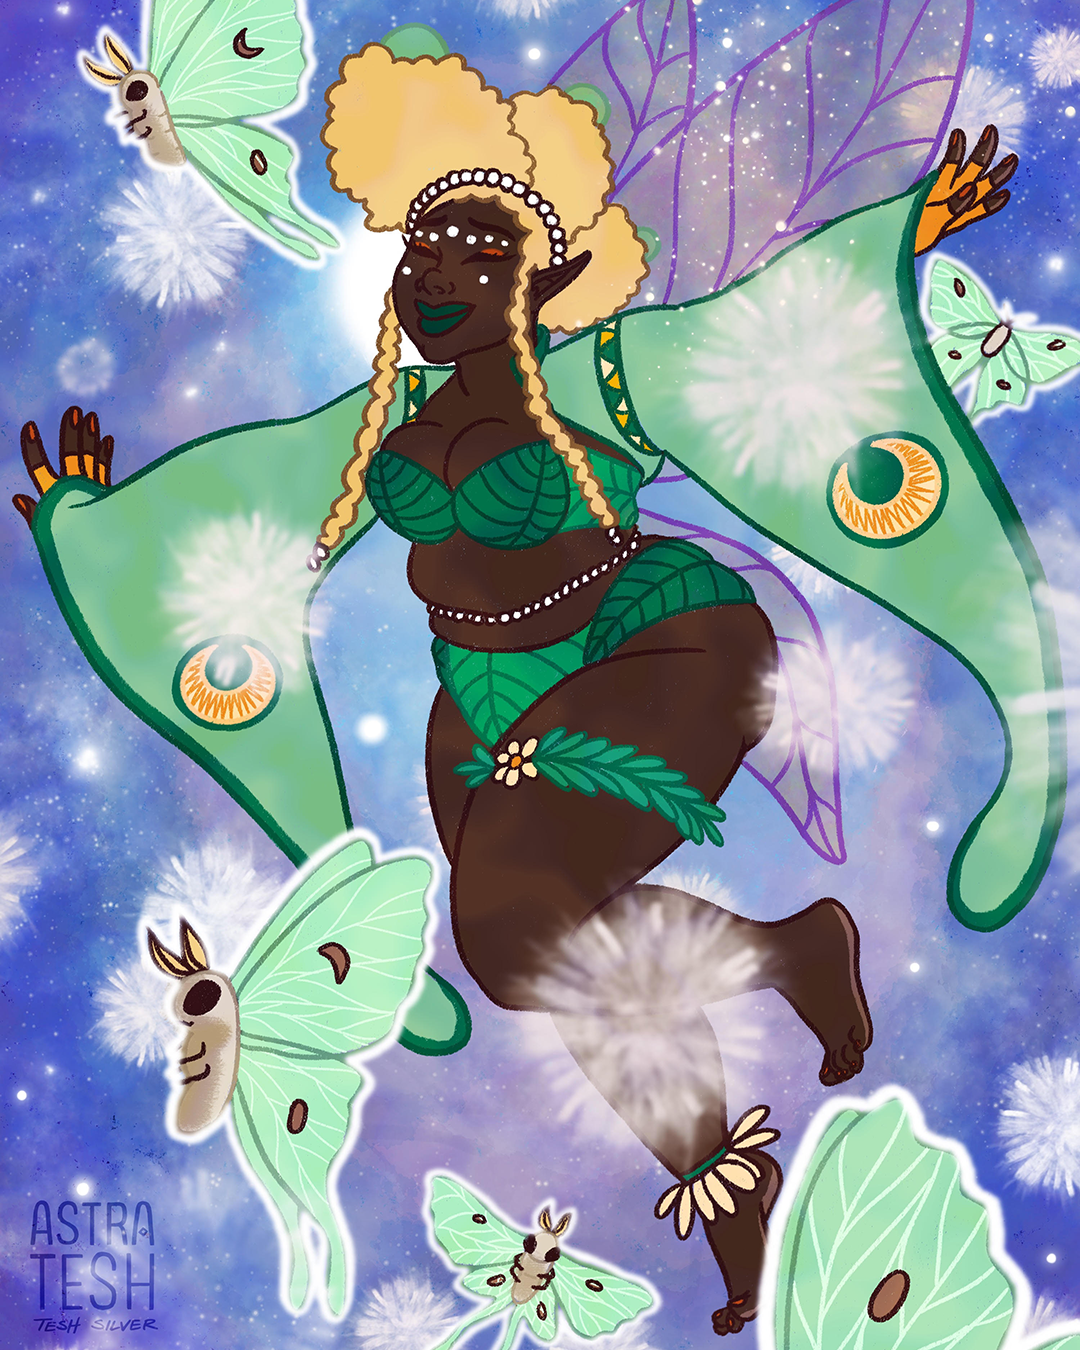 Illustration of a Black fairy with Afro textured blonde hair. She is wearing a light green, long sleeved jacket that looks like moth wings. She is surrounded by glowing Luna moths. They are flying at night by the light of the moon surrounded by stars.